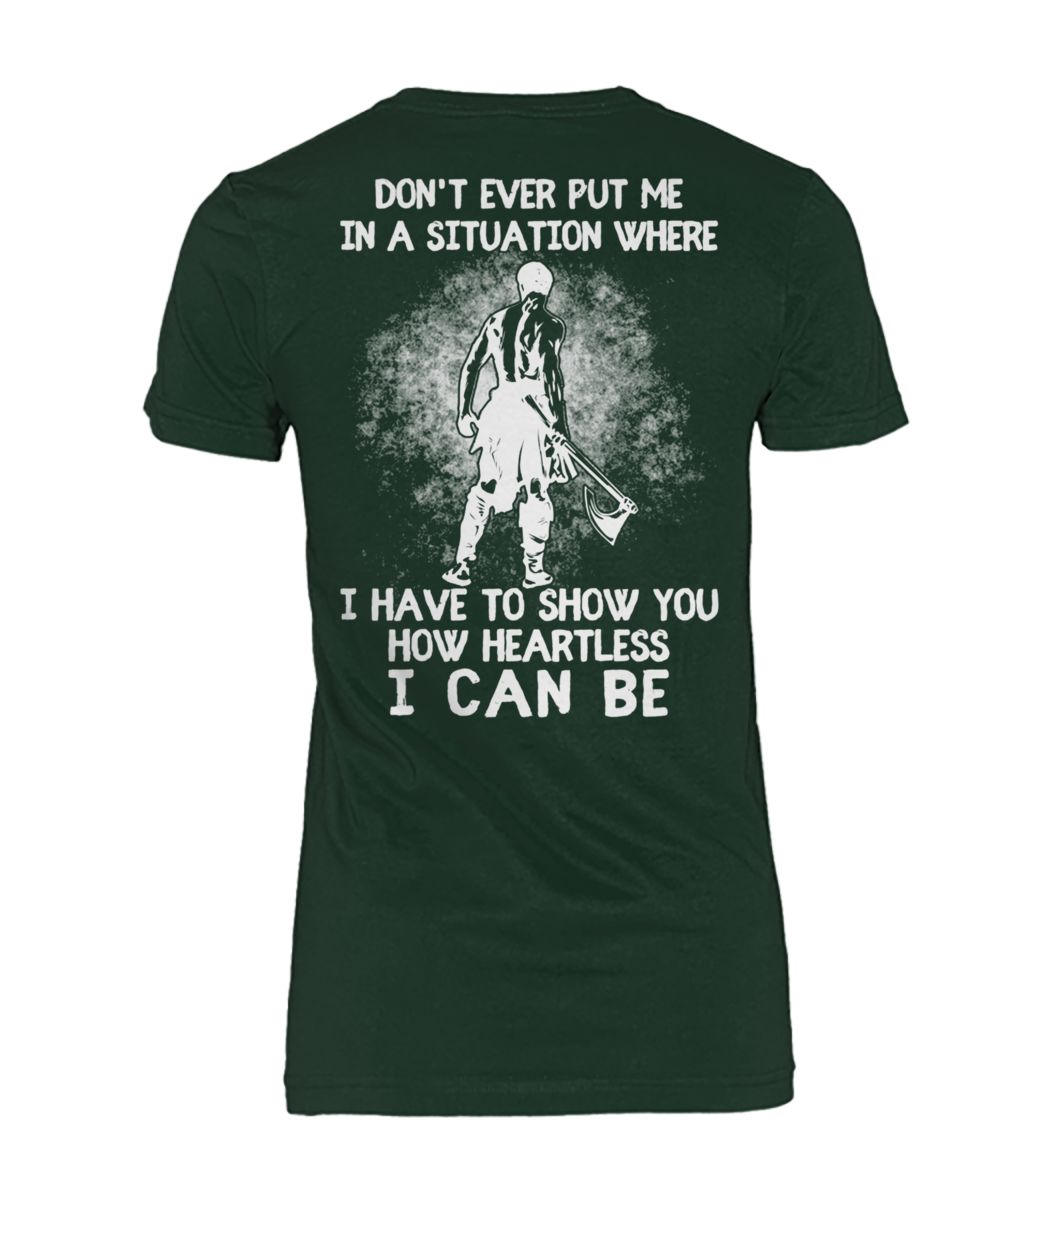 Don't ever put me in a situation where I have to show you how heartless I can be women's crew tee